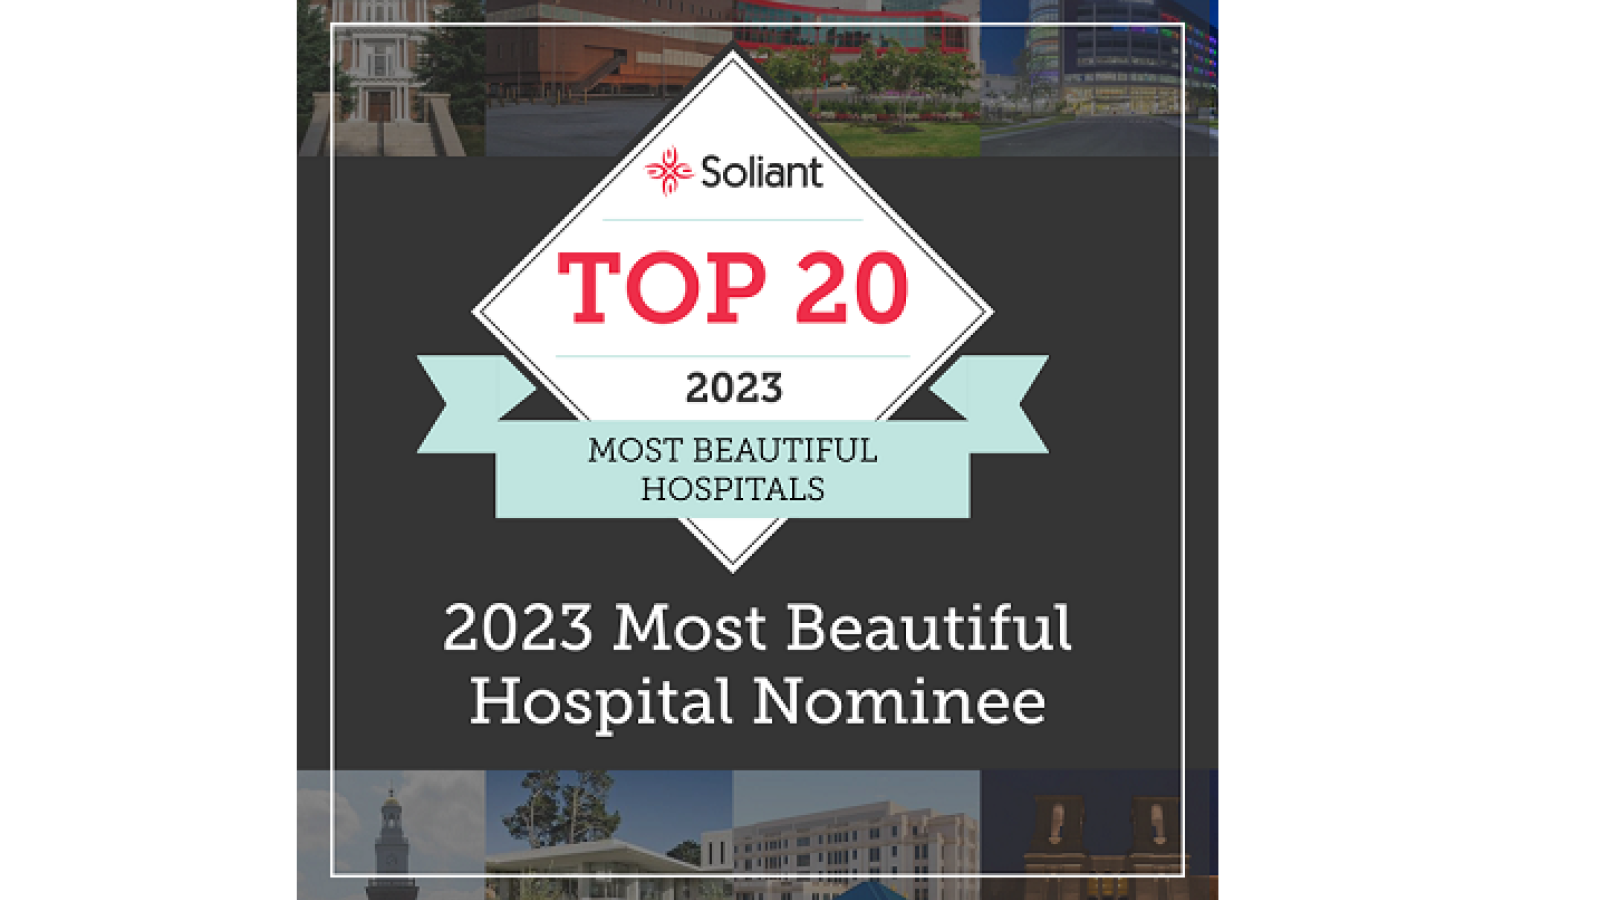 Guthrie Hospital Nominated in Most Beautiful Contest